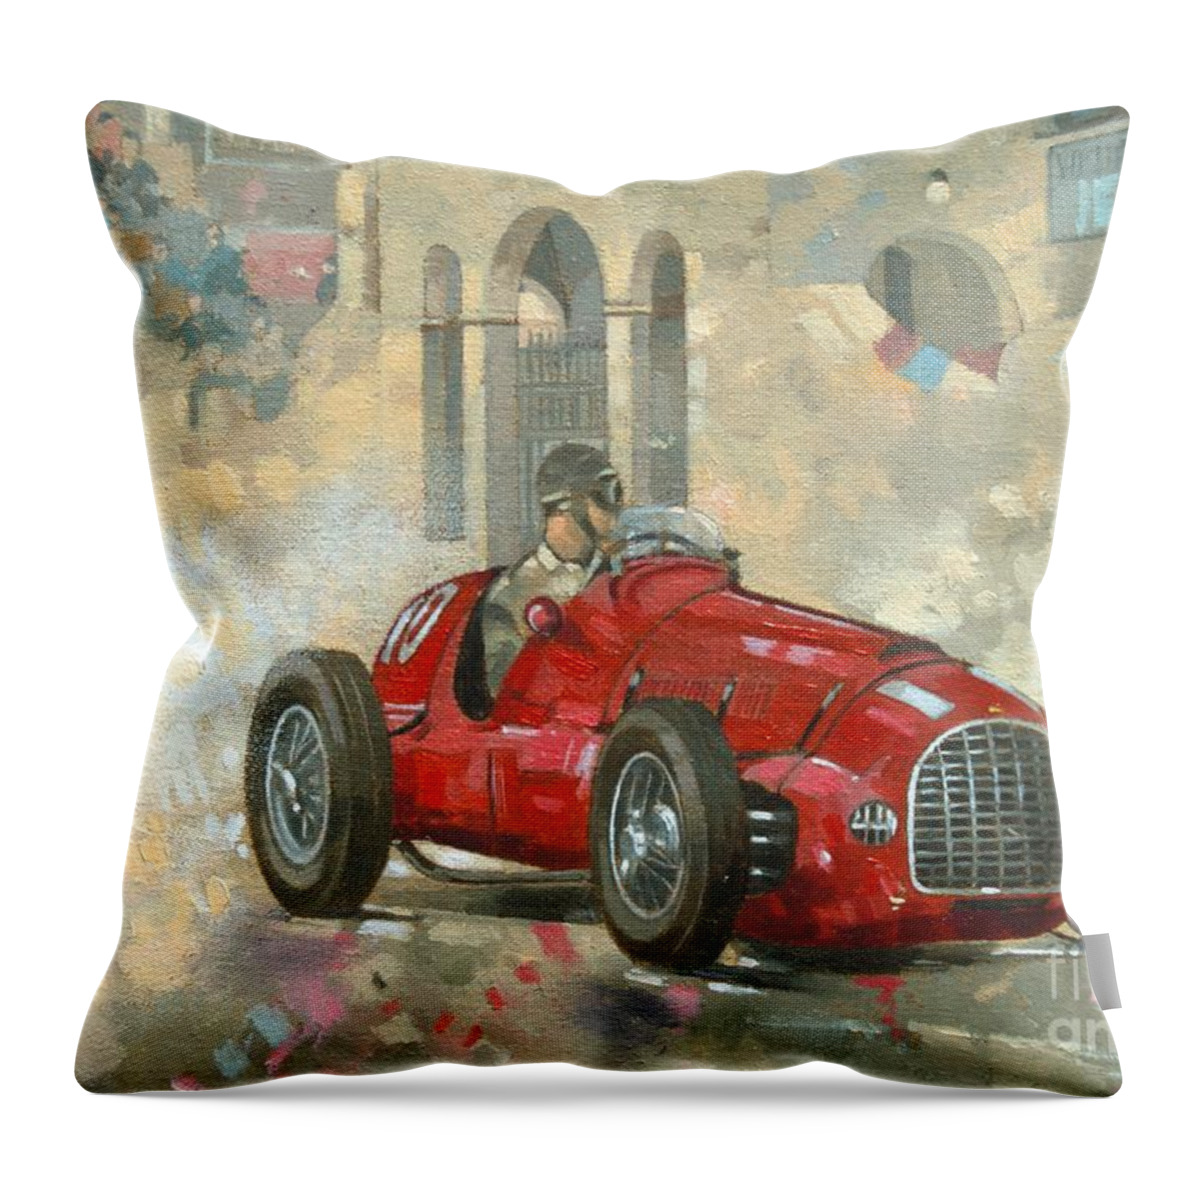 Whitehead Throw Pillow featuring the painting Whitehead's Ferrari passing the pavillion - Jersey by Peter Miller